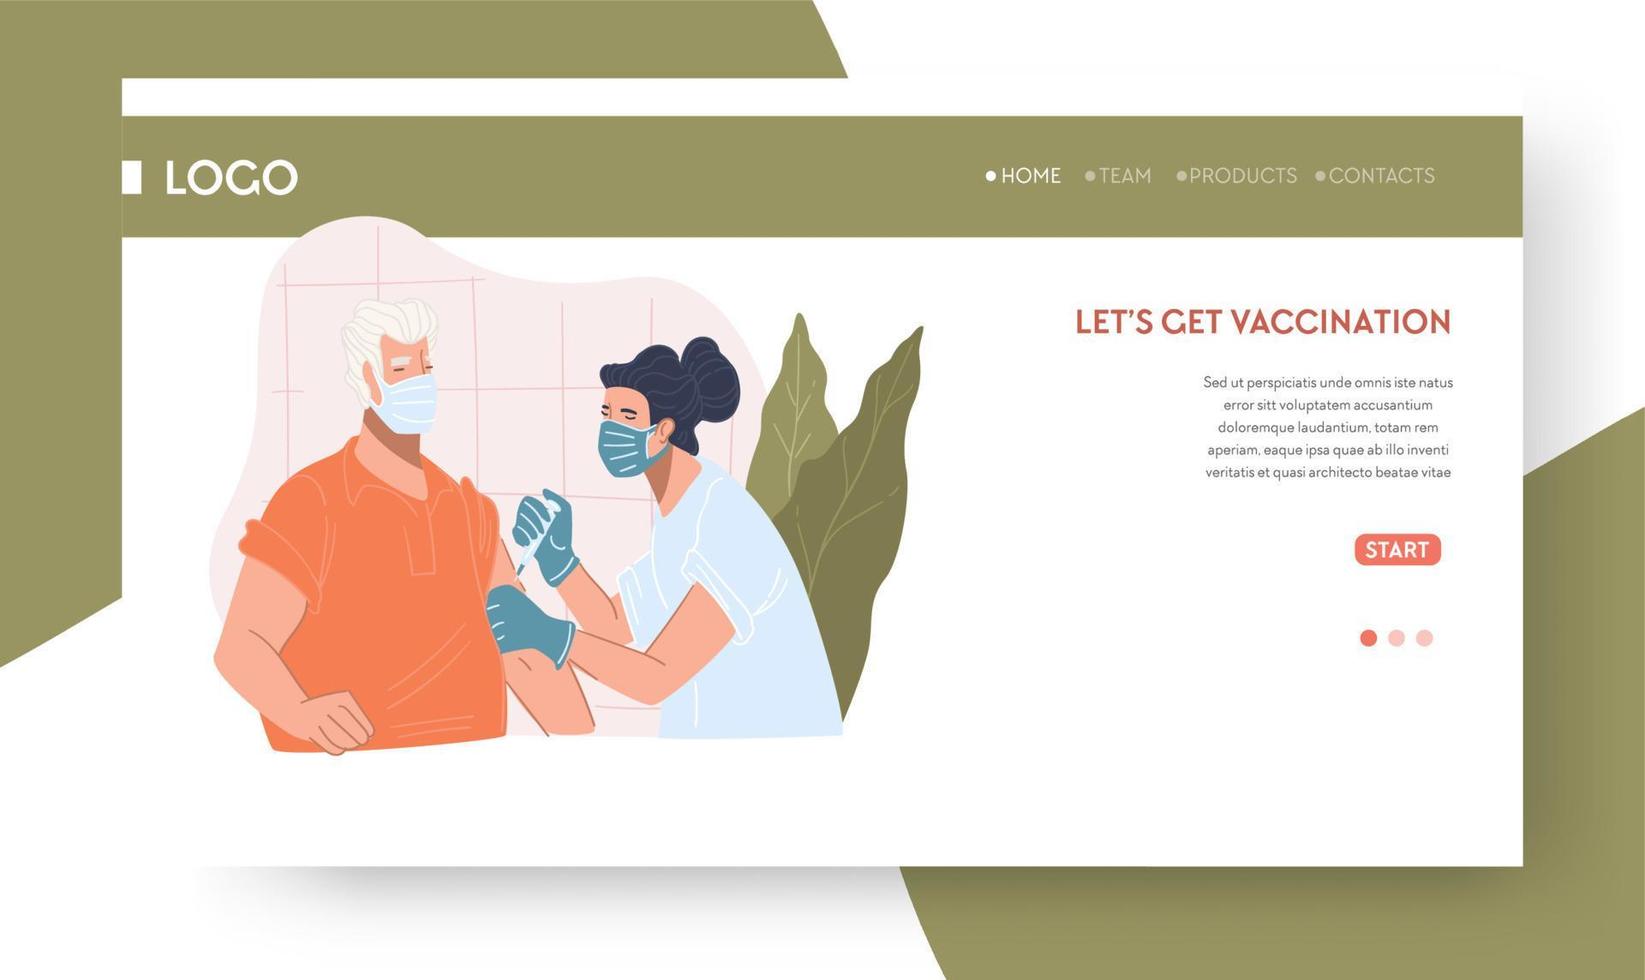 Lets get vaccination, stop covid 19 and virus diseases. Senior man having injection at hospital or private clinic. Website or web landing page template with navigation buttons. Vector in flat style